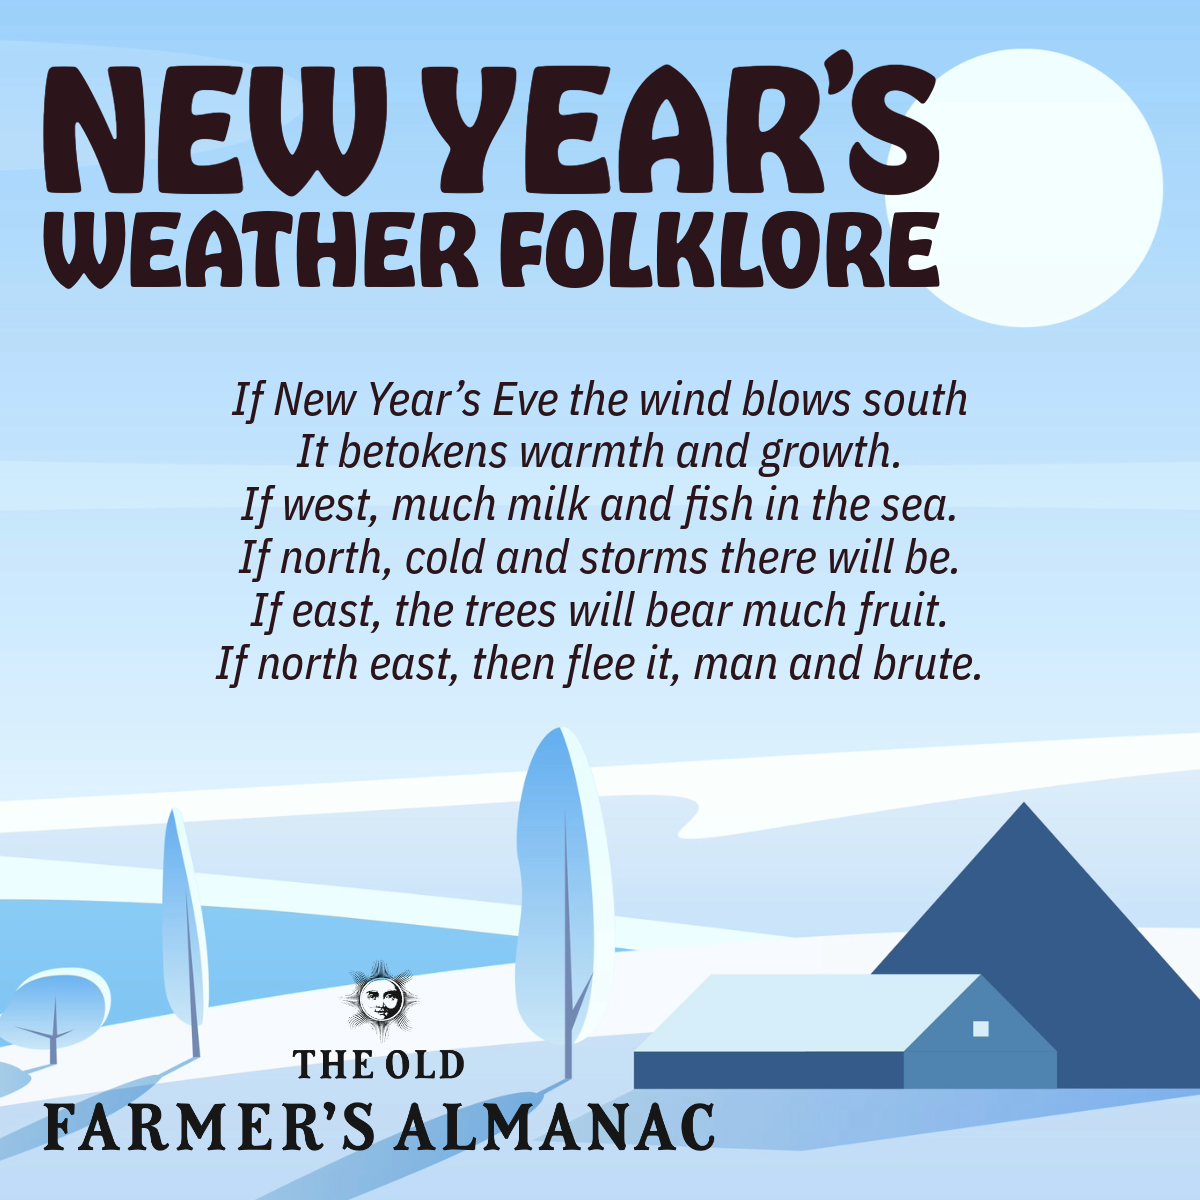 new years weather folklore poem and graphic